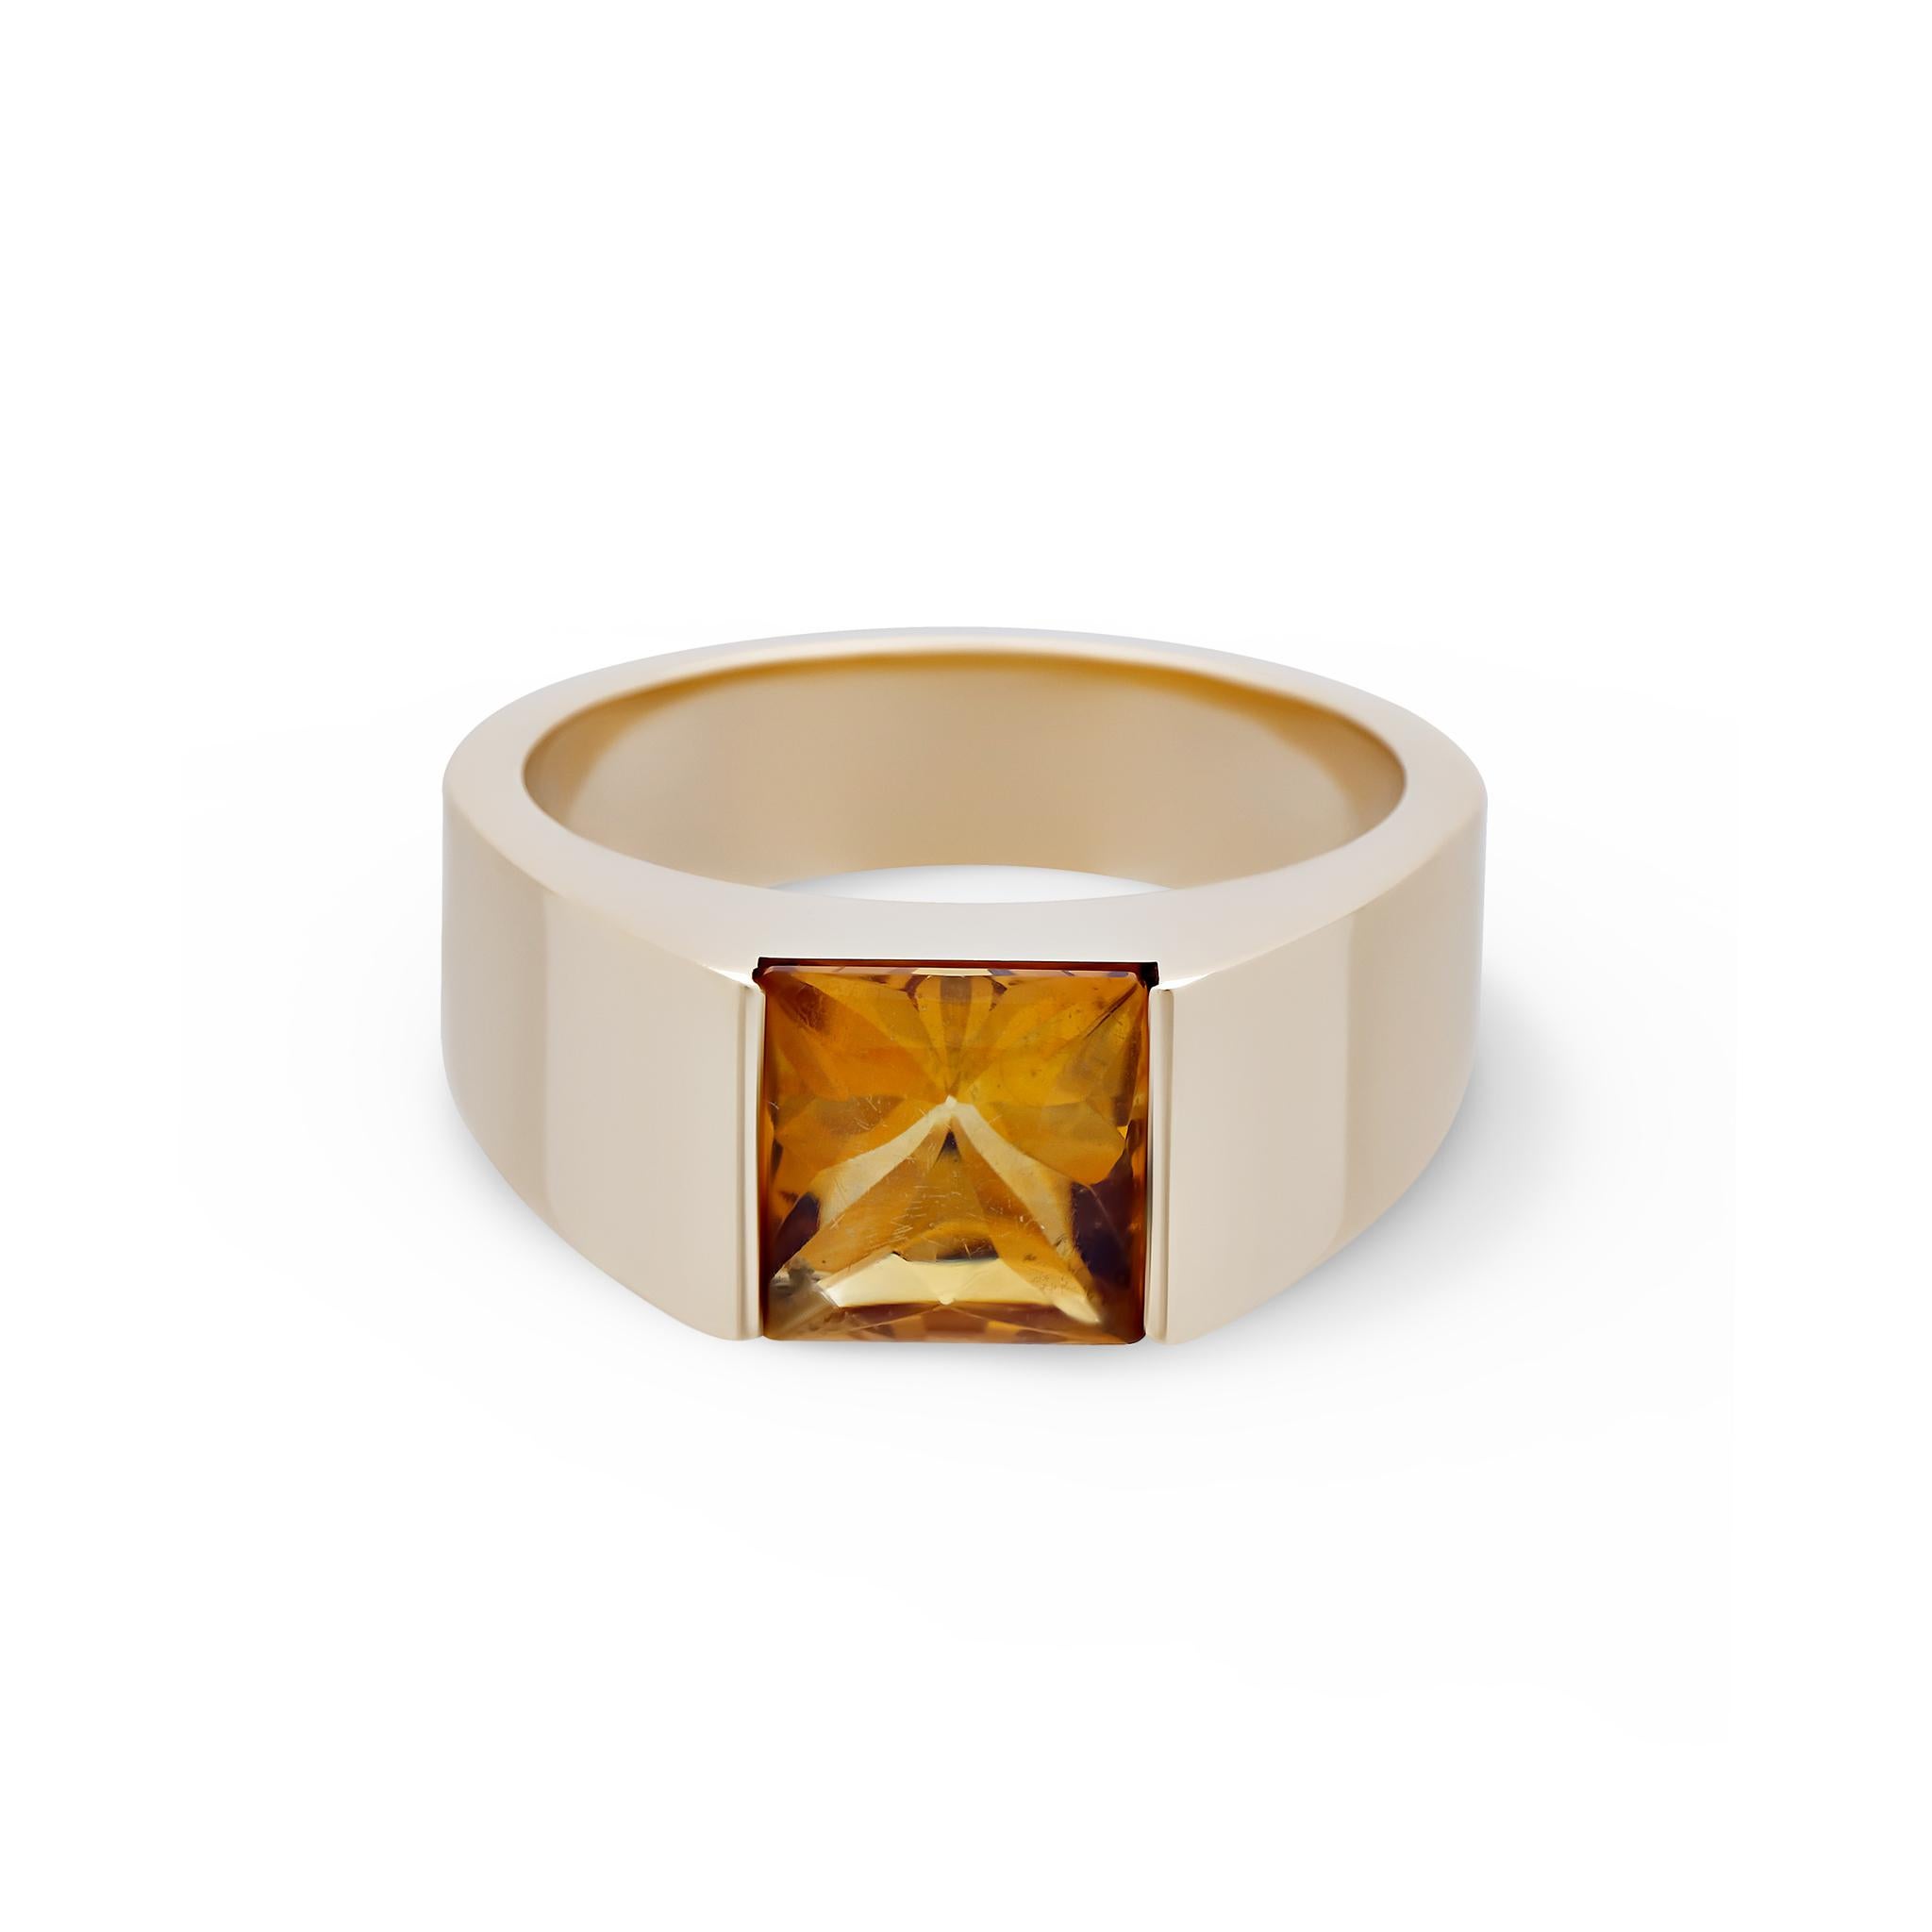 METAL TYPE: 18K Yellow Gold
TOTAL WEIGHT: 14.4g
RING SIZE: 7.75
** Original Certificate Included
REFERENCE #: 16516-SST
CONDITION: Pre-owned, Excellent condition.